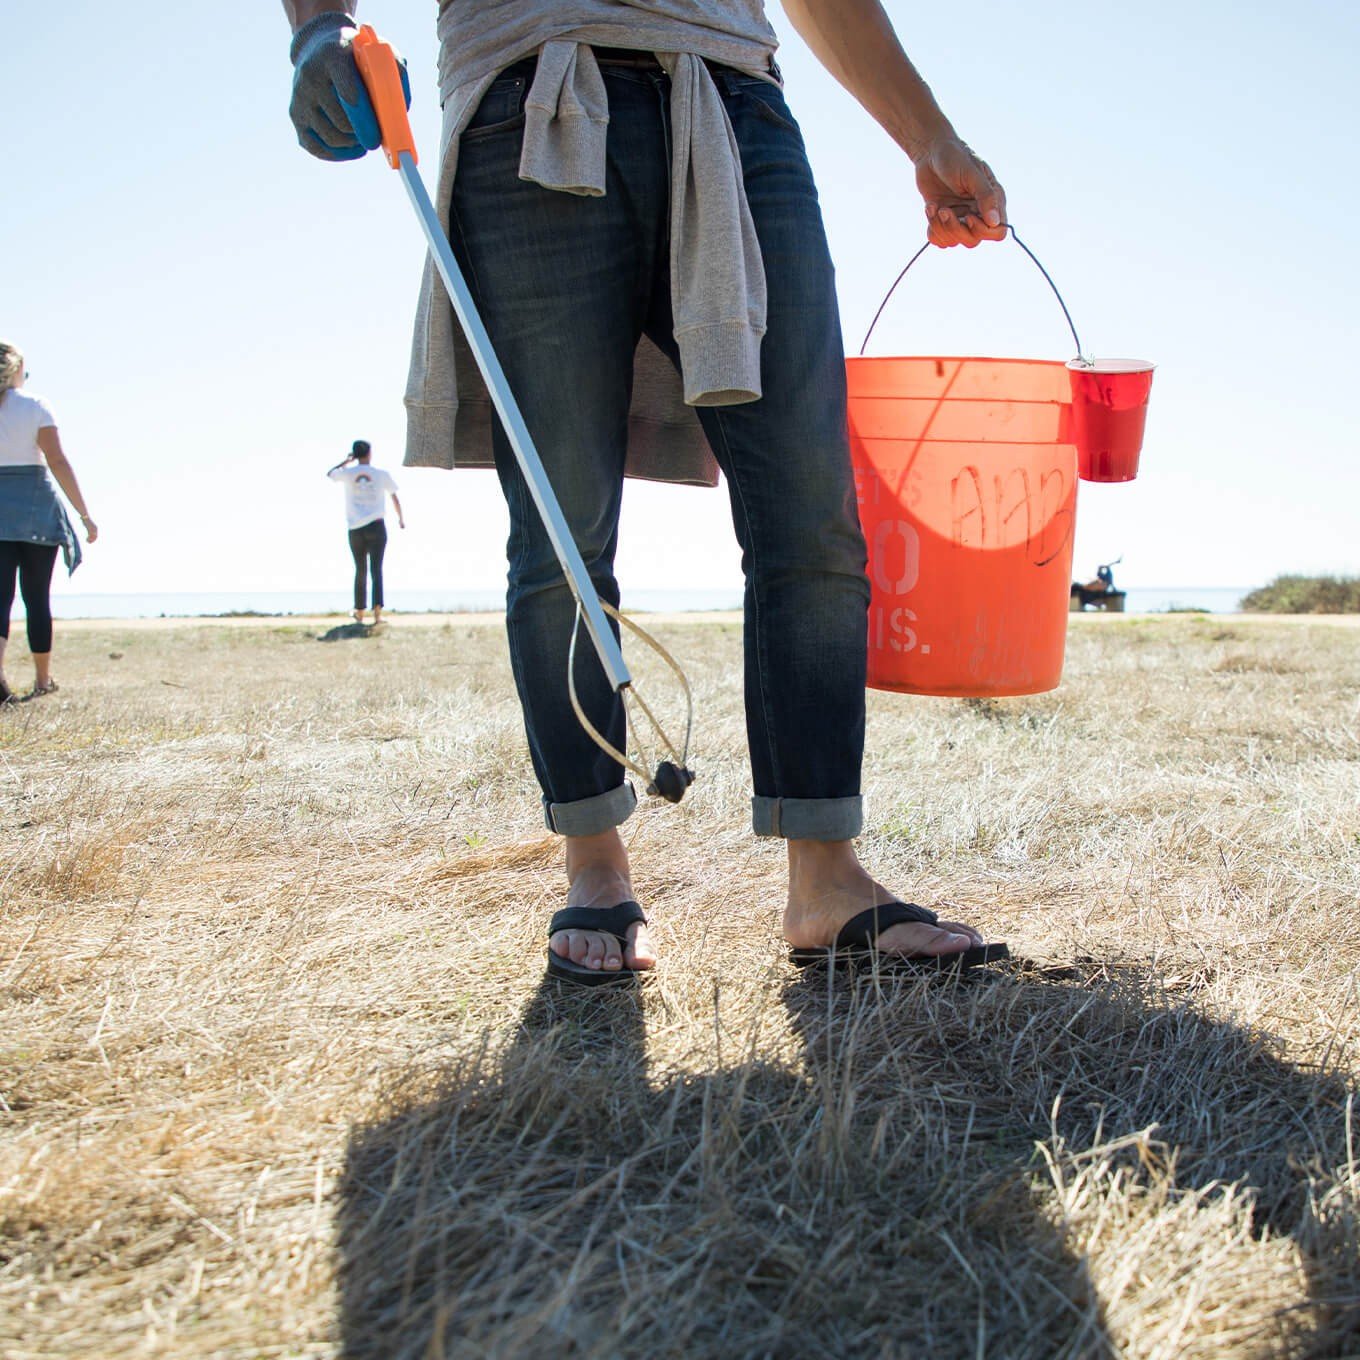 Volunteer with grabber and bucket as tools participating in a beach cleanup